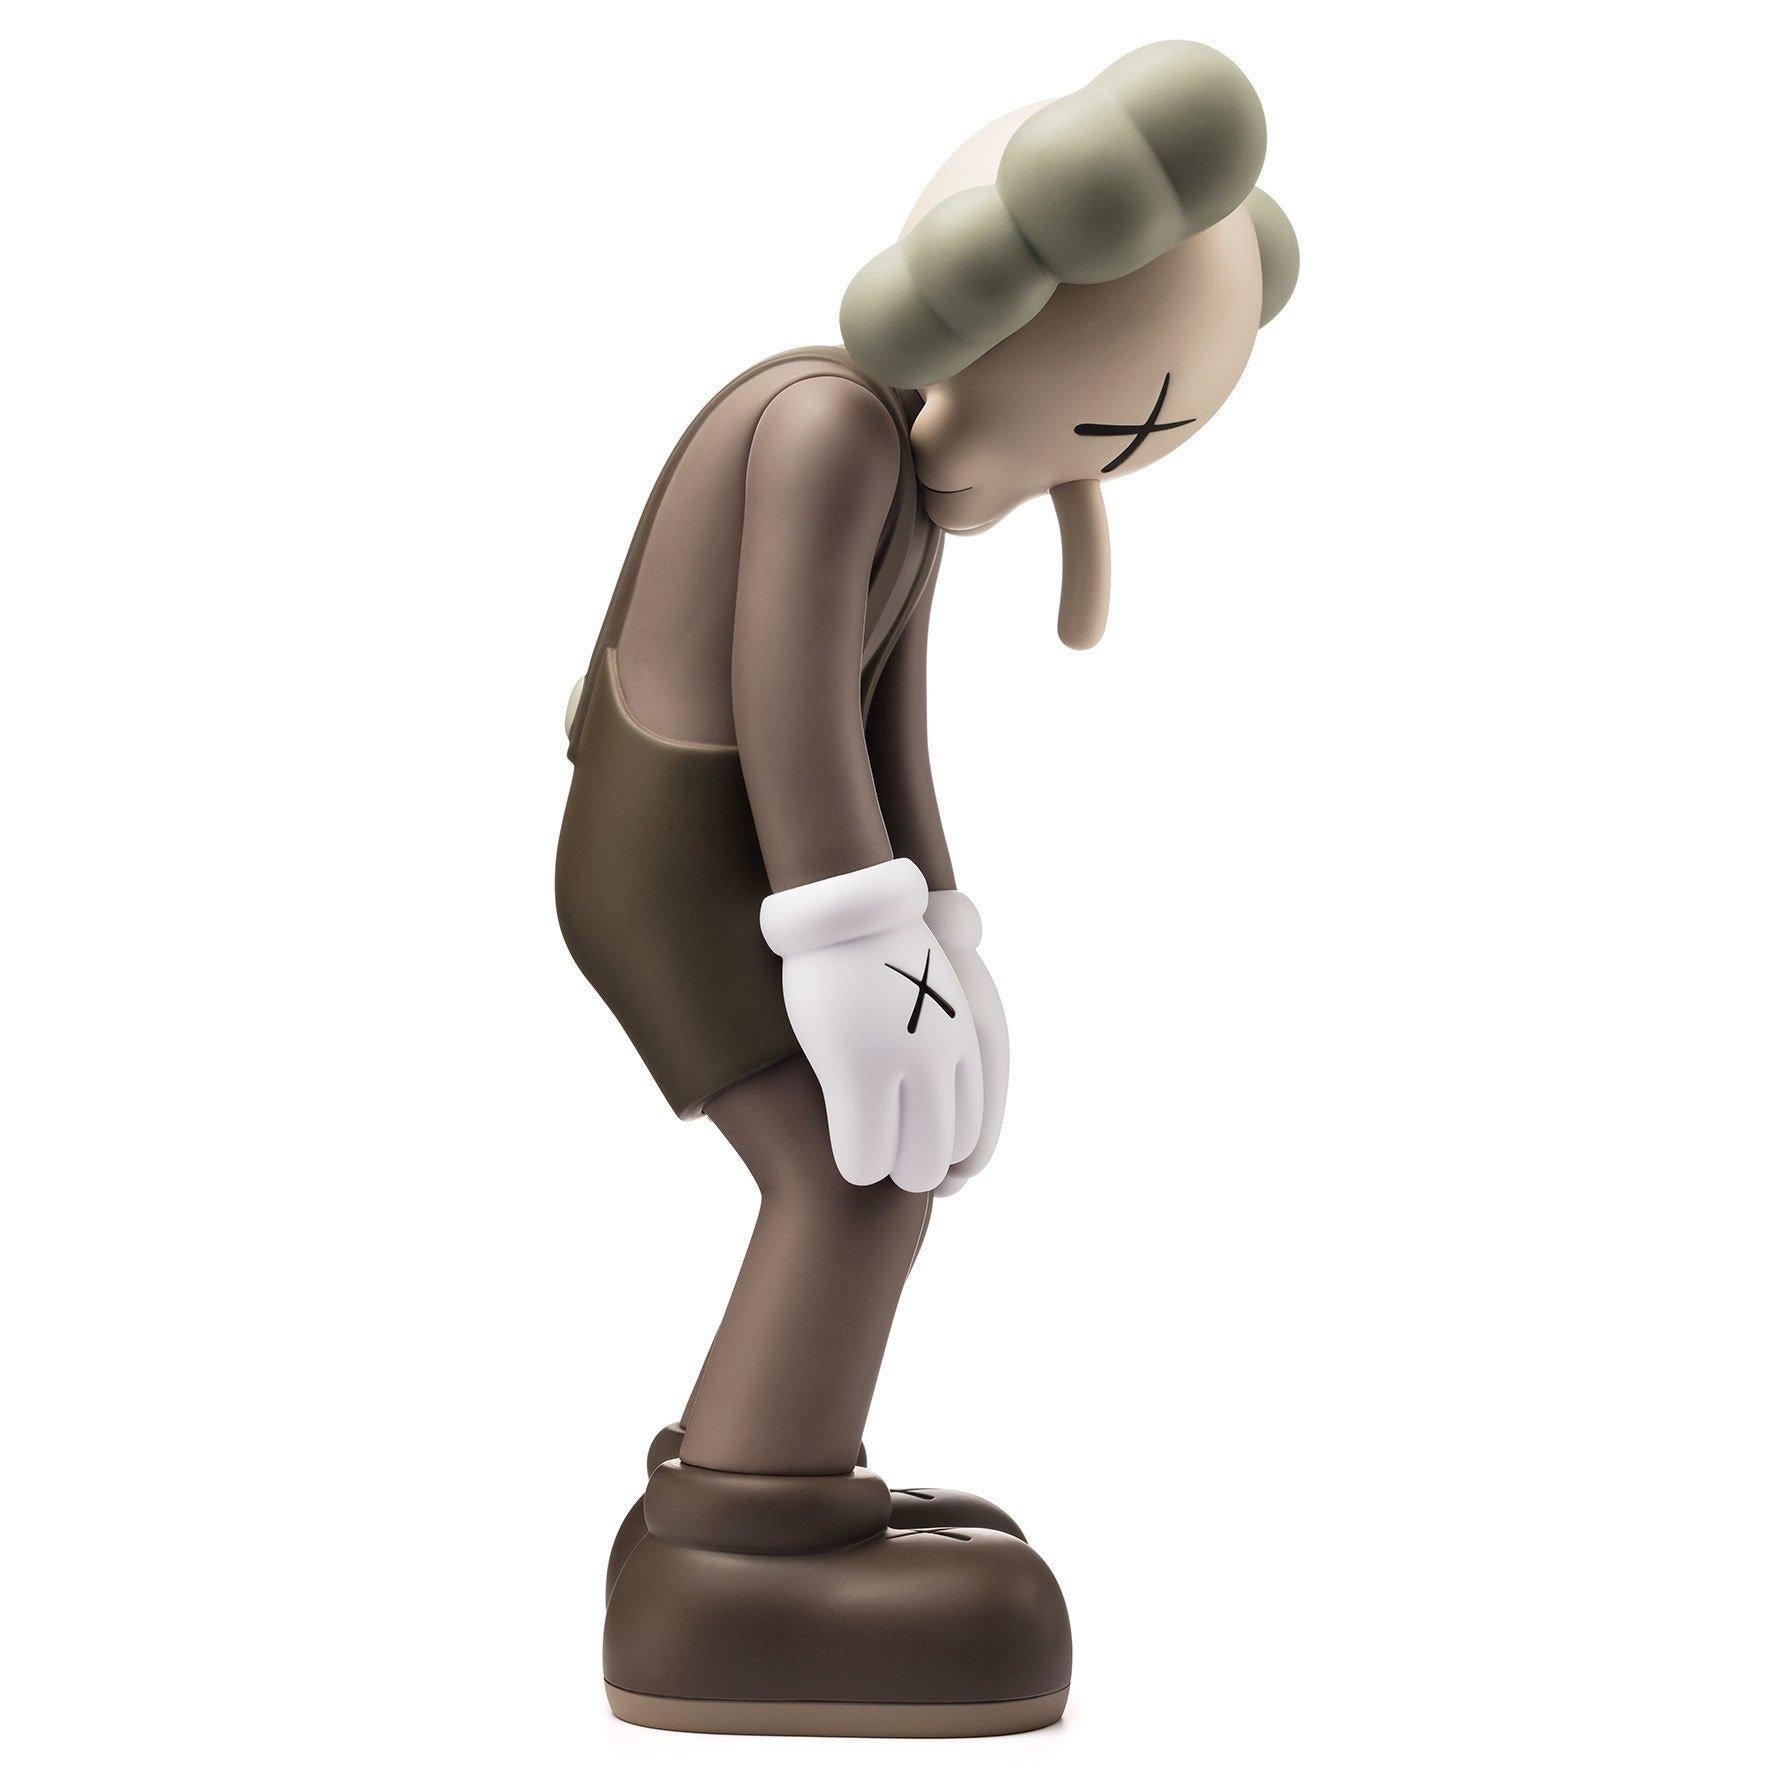 Small Lie (Brown)
Date of creation: 2017
Medium: Sculpture
Media: Vinyl
Edition: Unknown and sold out
Size: 27.5 x 12.3 x 13 cm
Observations: Vinyl sculpture published in 2017 by KAWS/ORIGINALFAKE & Medicom Toys. Sent inside its original box. 
KAWS